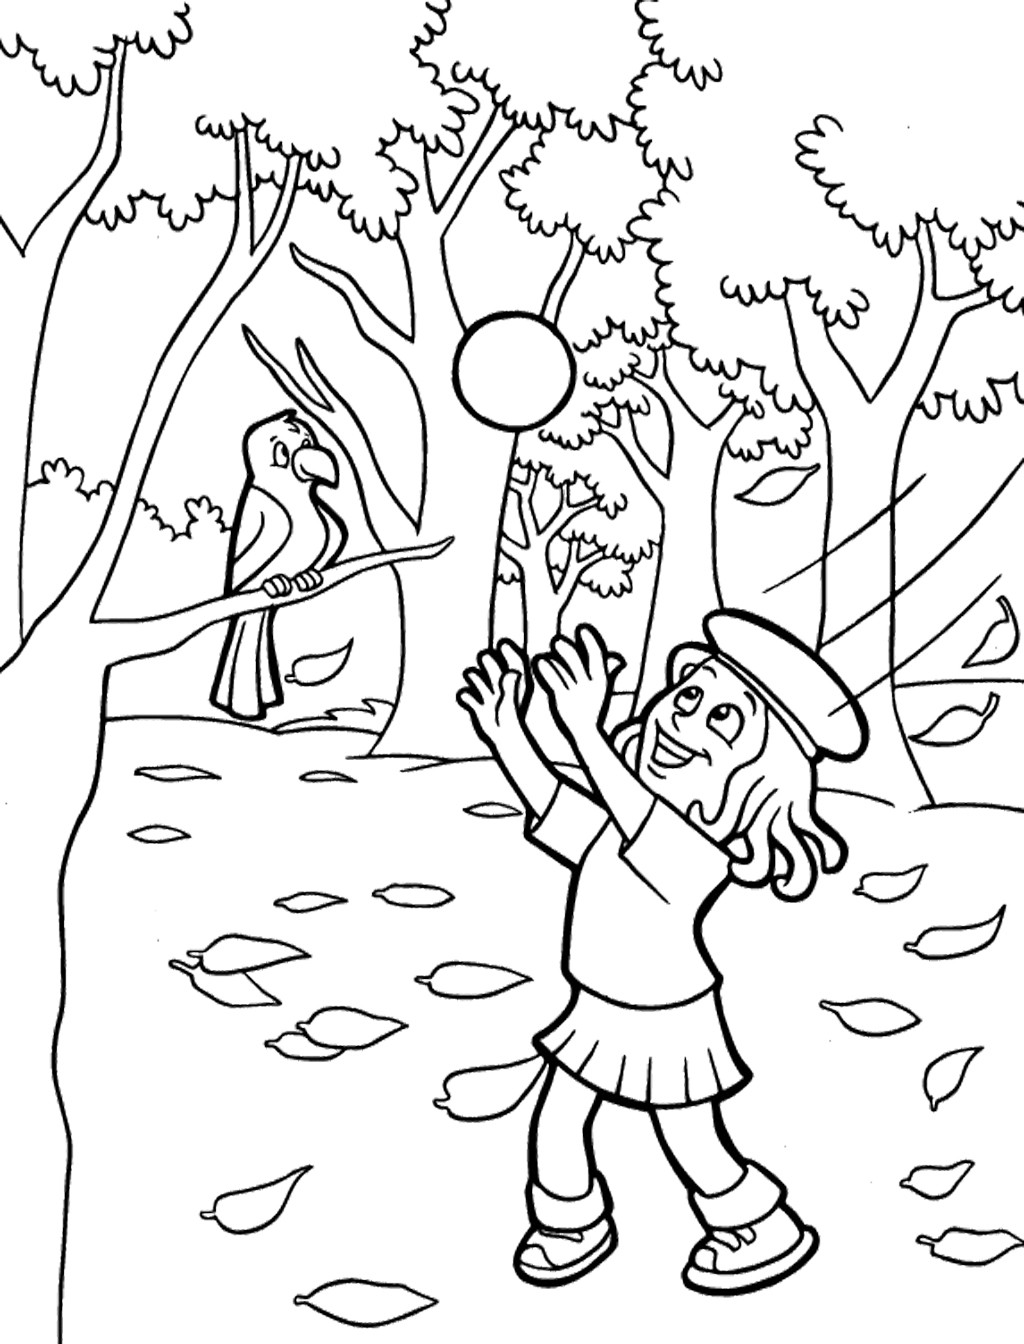 Fun Coloring Pages For Boys Fall
 Fall Coloring Pages